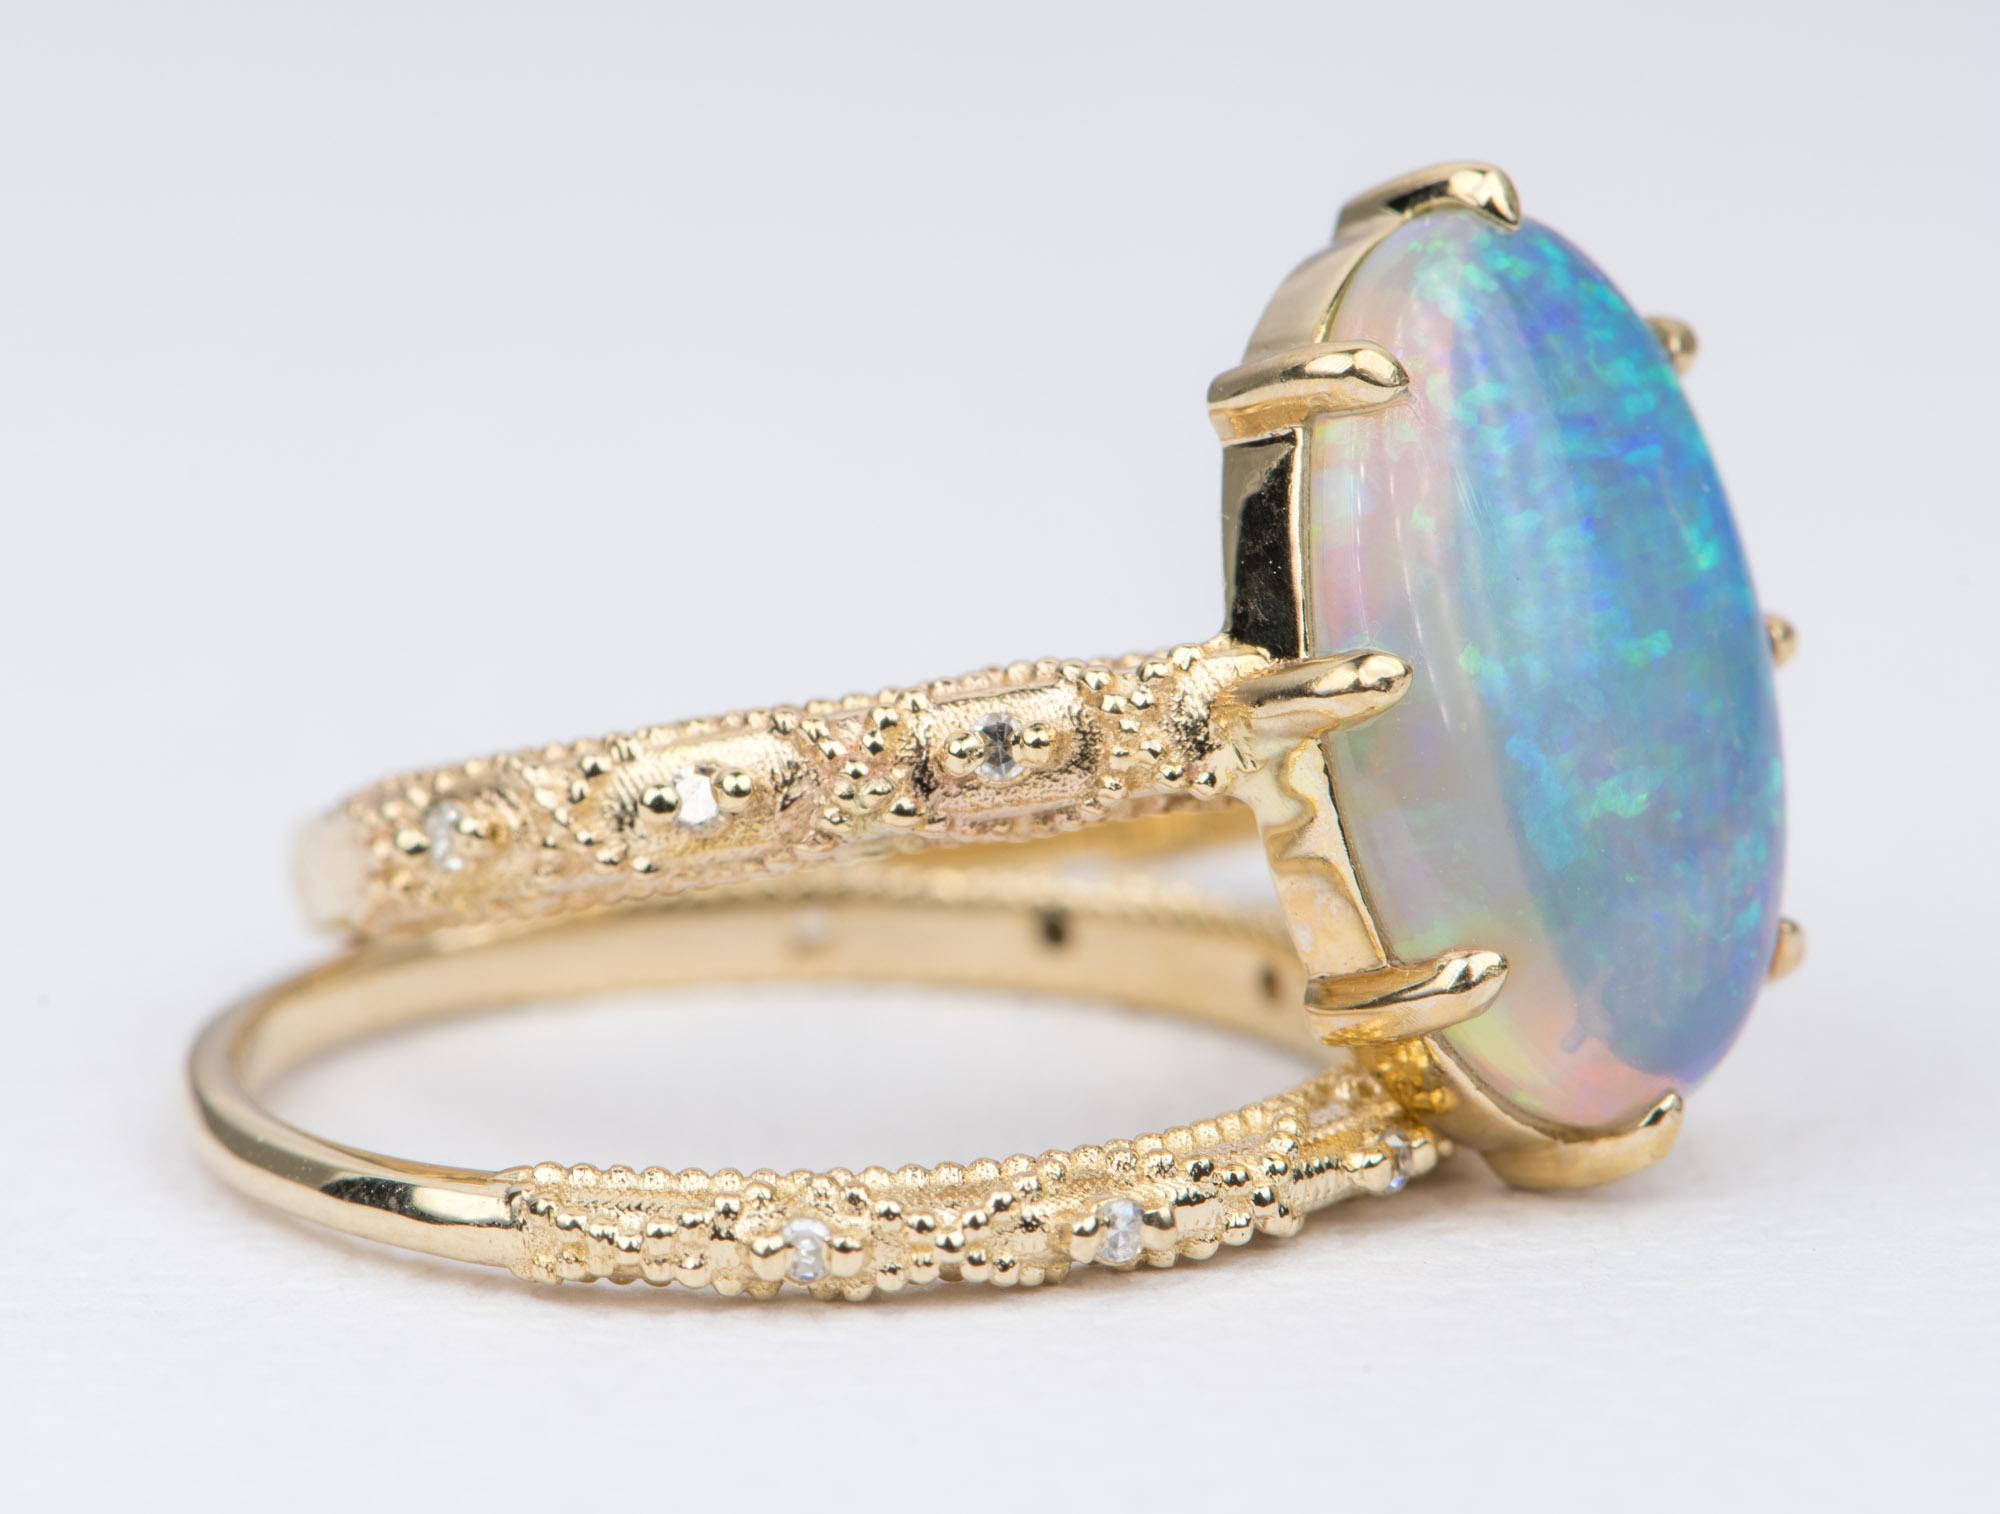 ♥♥♥♥ This listing is sold and priced as a set ♥♥♥�♥

♥  A solid 14k yellow gold ring set with a beautiful oval shape Australian opal, set on a vintage-inspired lace filigree band to accent the center stone 
♥  The engagement ring is paired with a